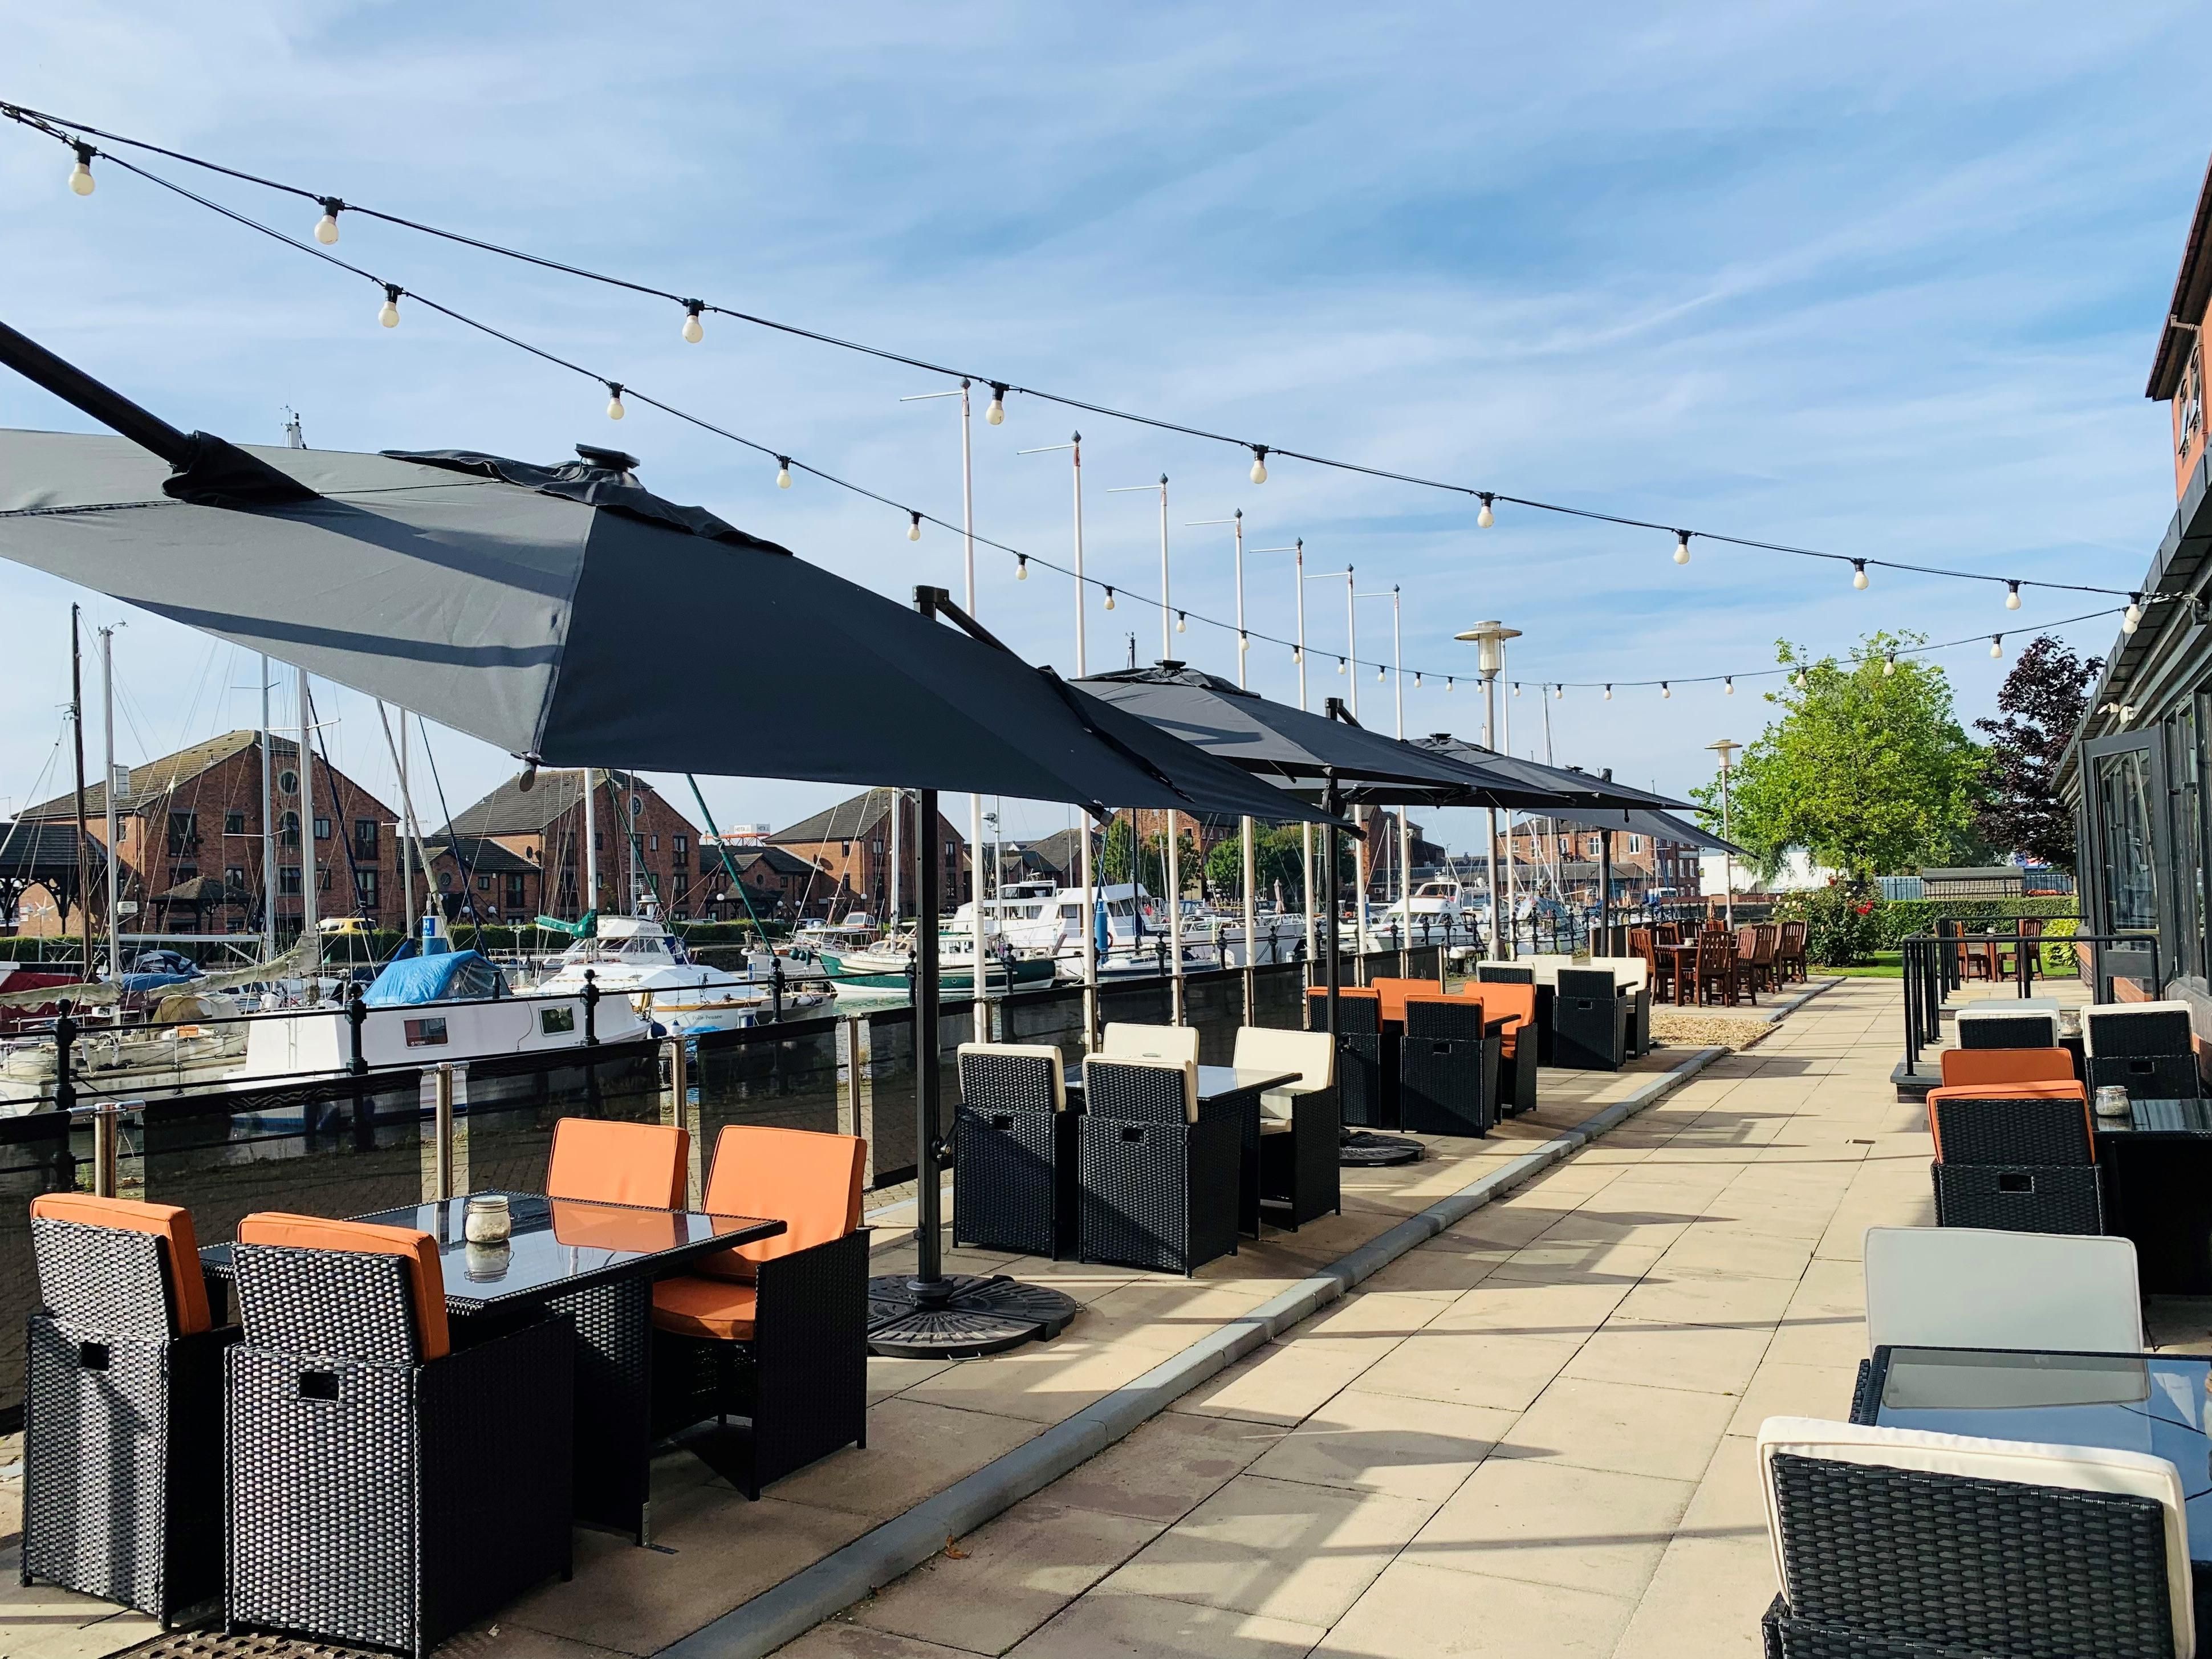 Take a seat on our terrace overlooking Hull Marina and watch the world go by with a cold beverage, Starbucks coffee or a bite to eat.